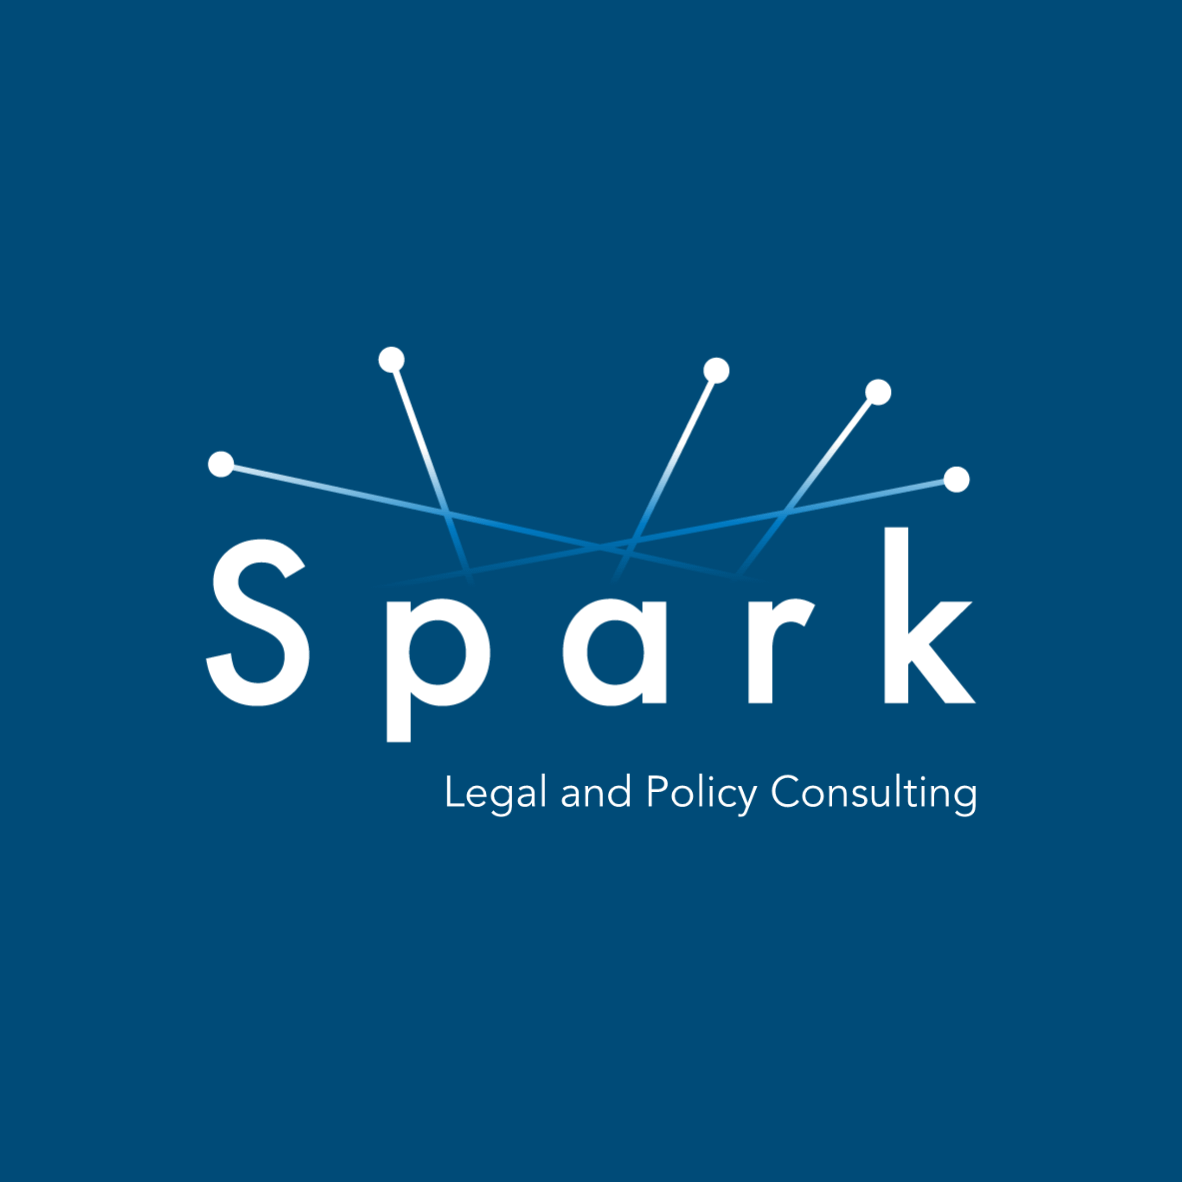 Spark Legal and Policy Consulting